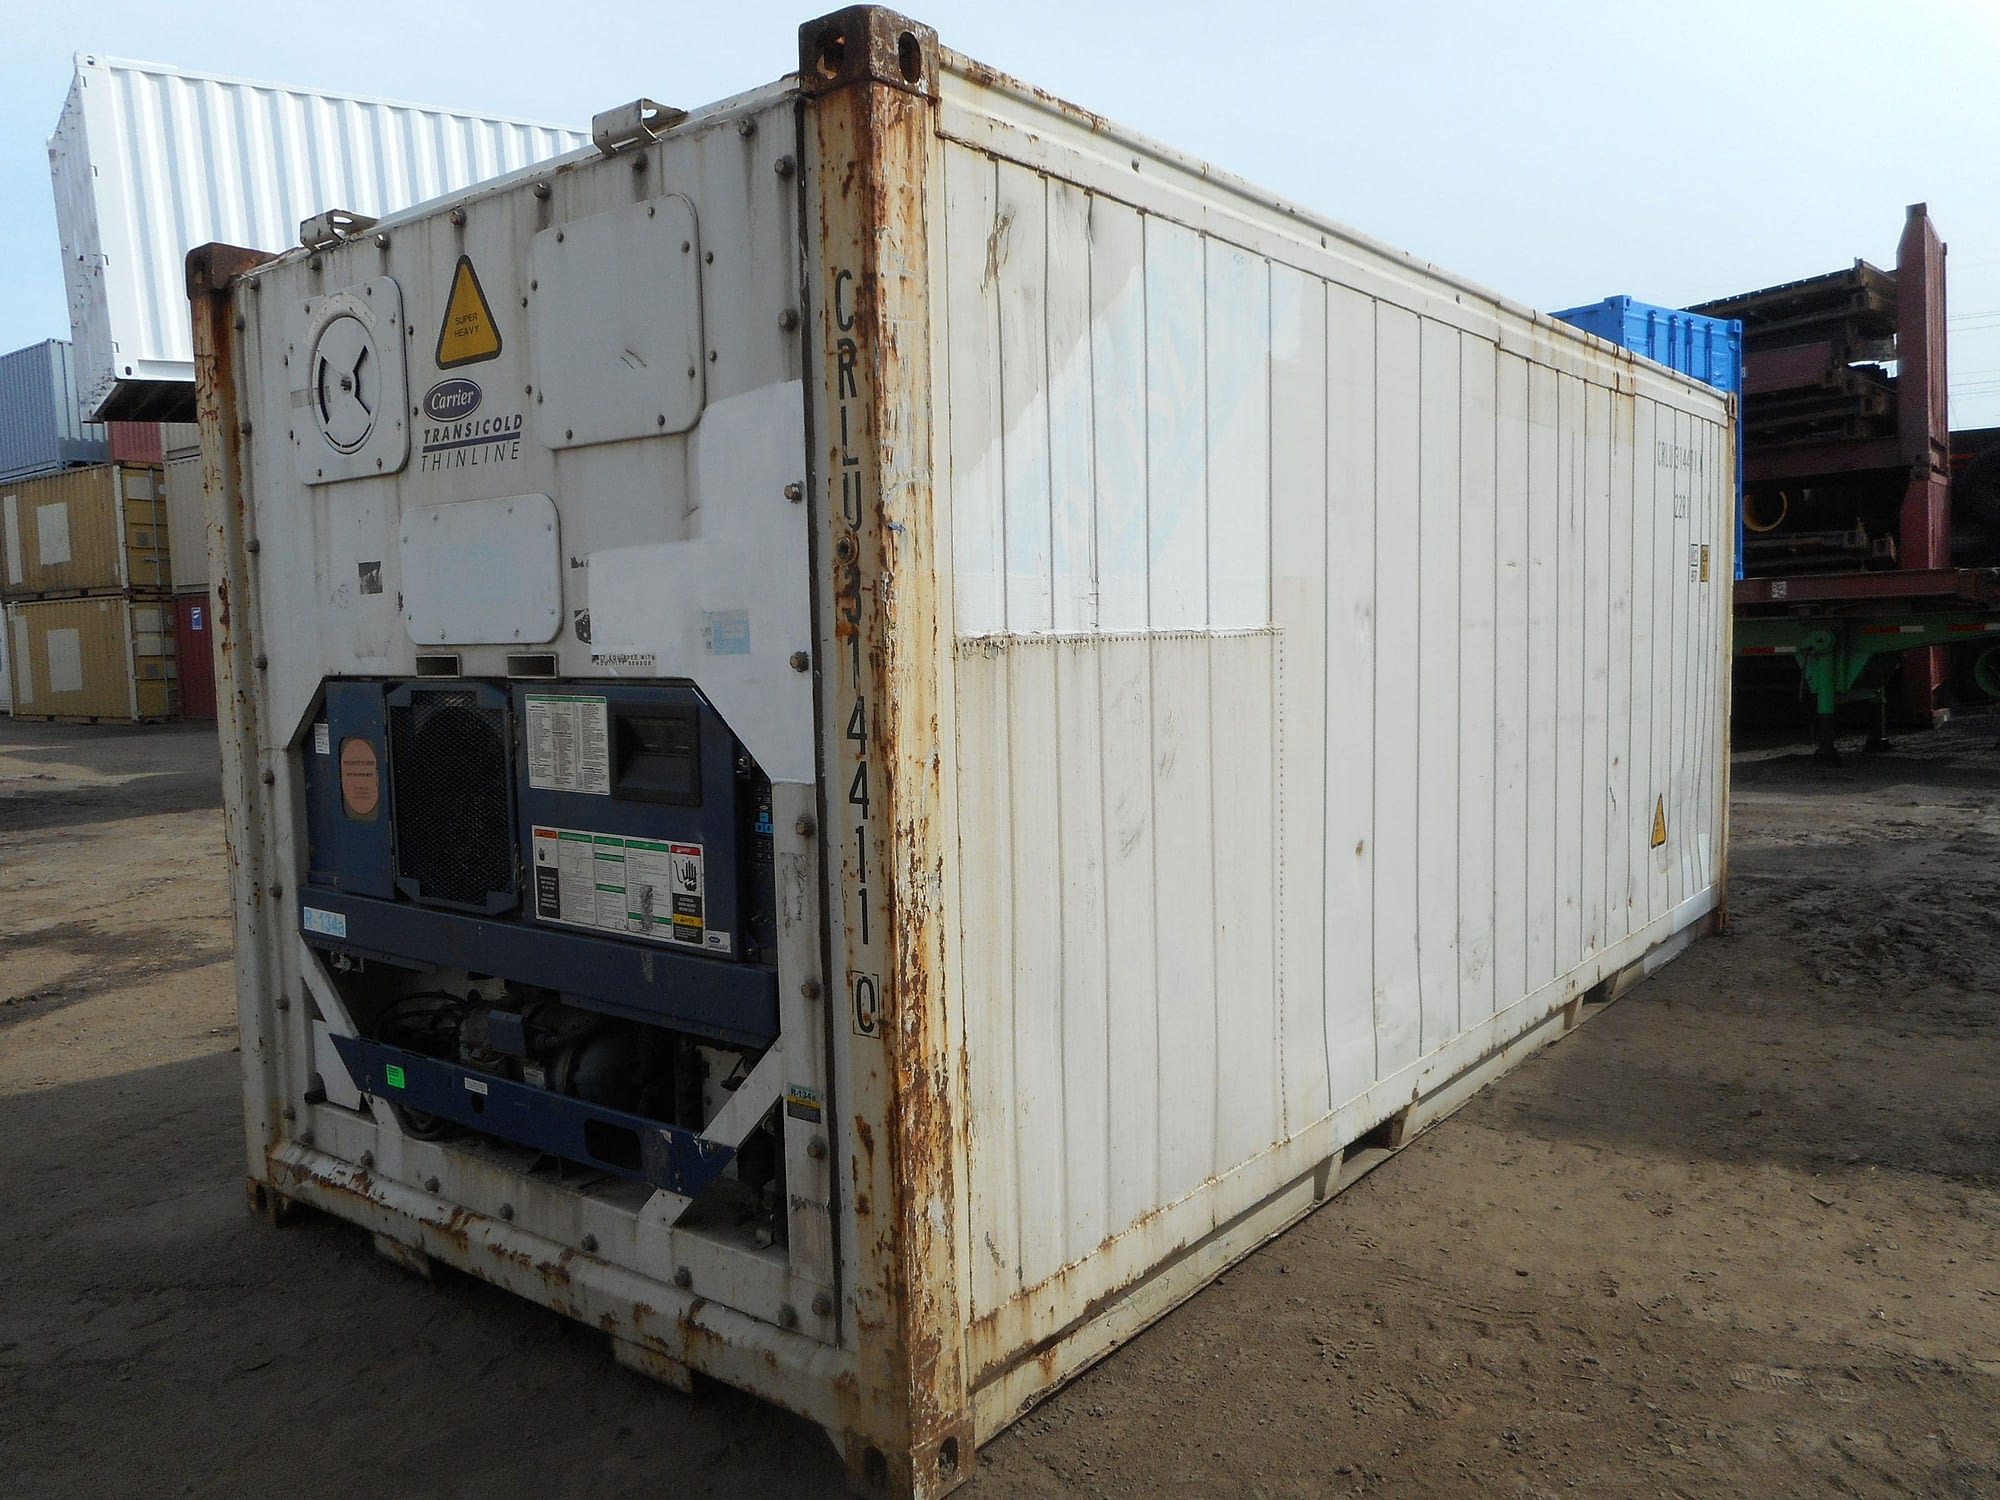 TRS Containers sells rents and modifies aluminum and steel clad reefer containers